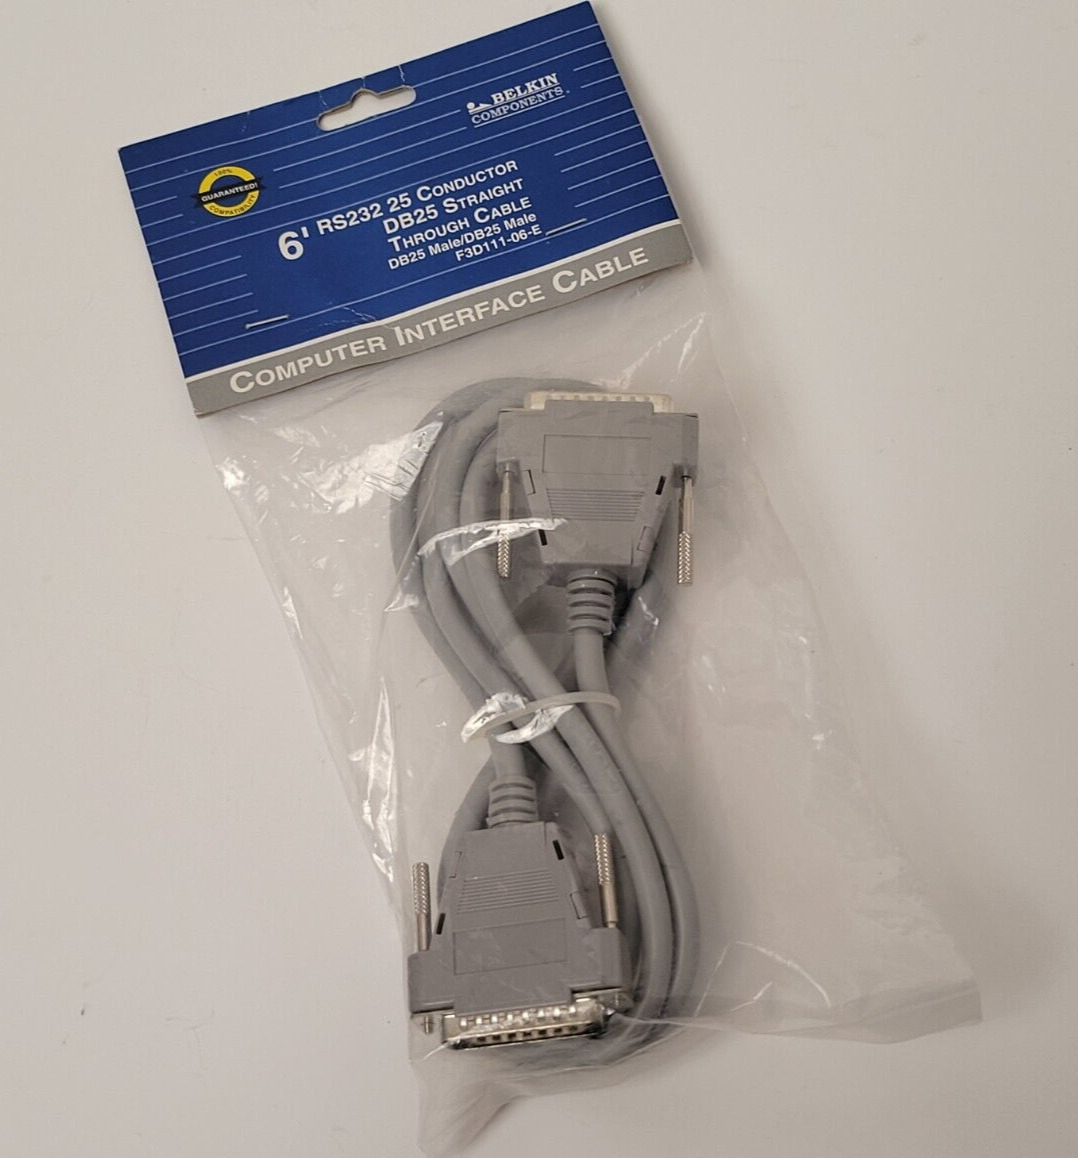 NEW Belkin 6 ft. RS232 25 Conductor DB25 Straight Thru Cable DB25 Male/DB25 Male